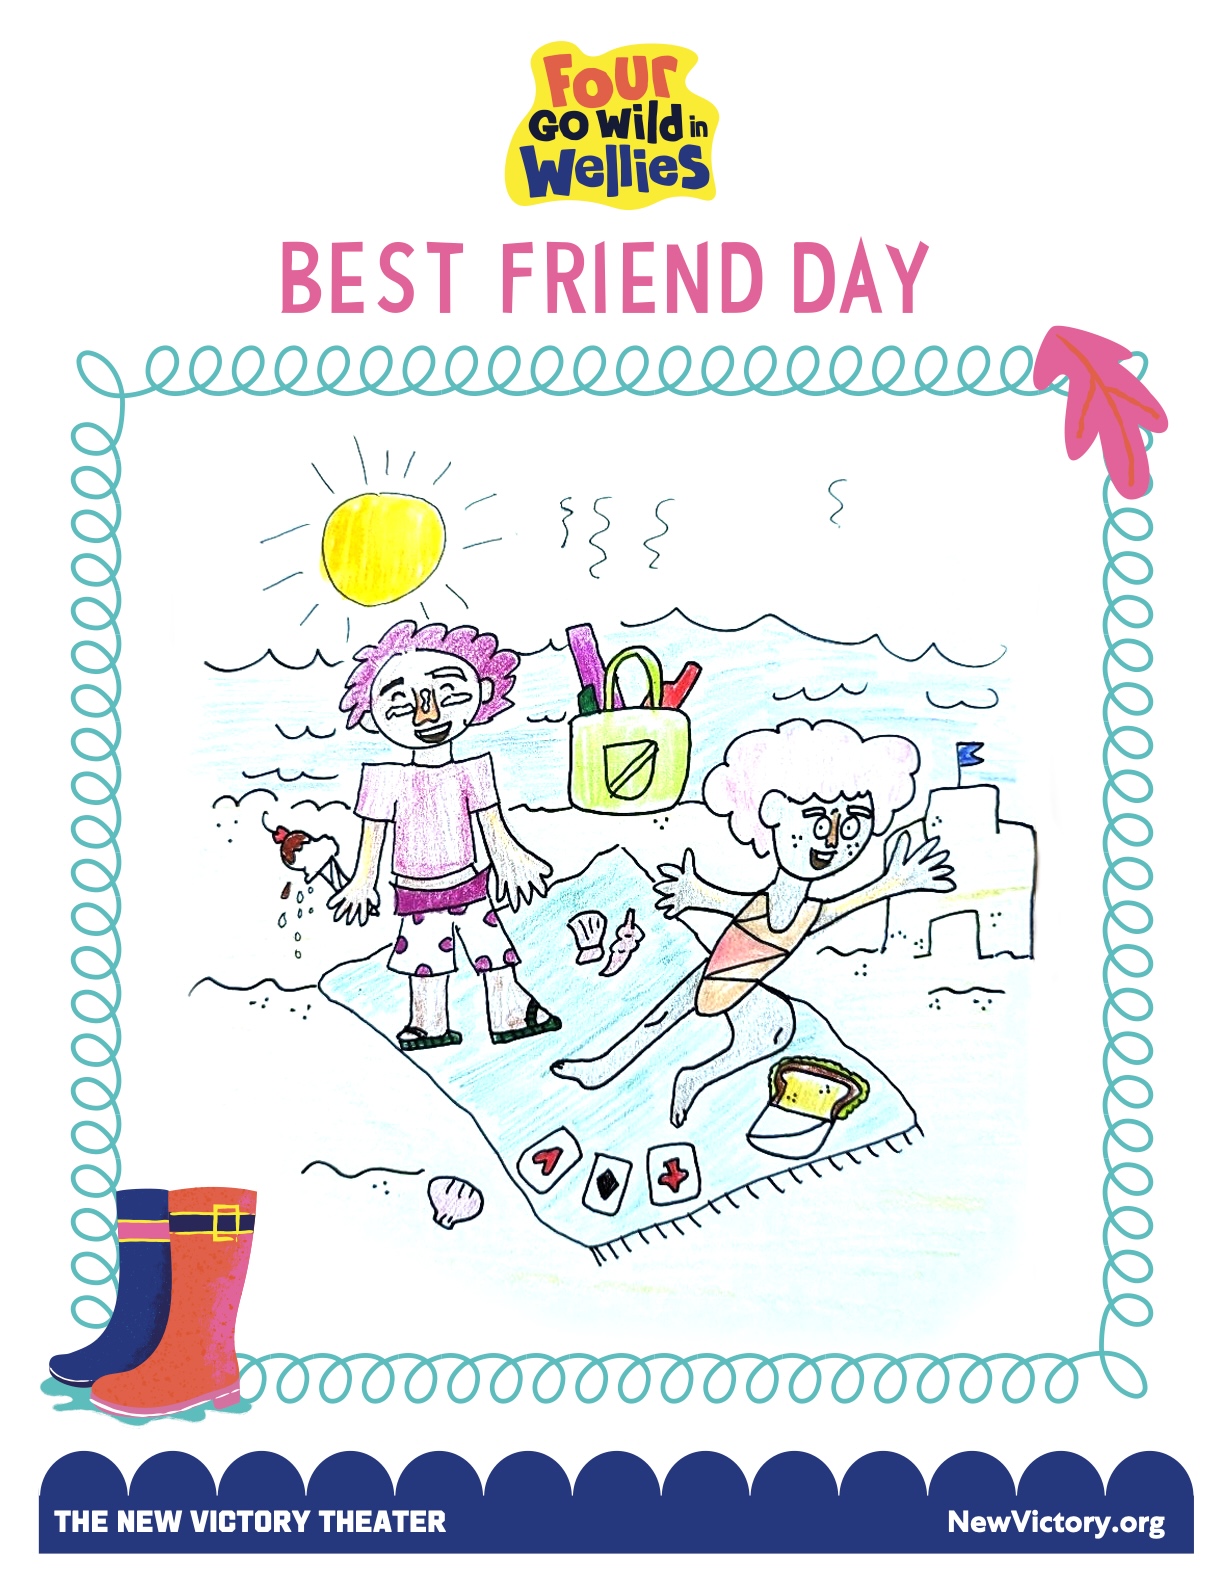 Best Friend Day illustration example, of two friends enjoying the beach on a sunny day, eating sandwiches and ice cream, building sandcastles and playing cards.